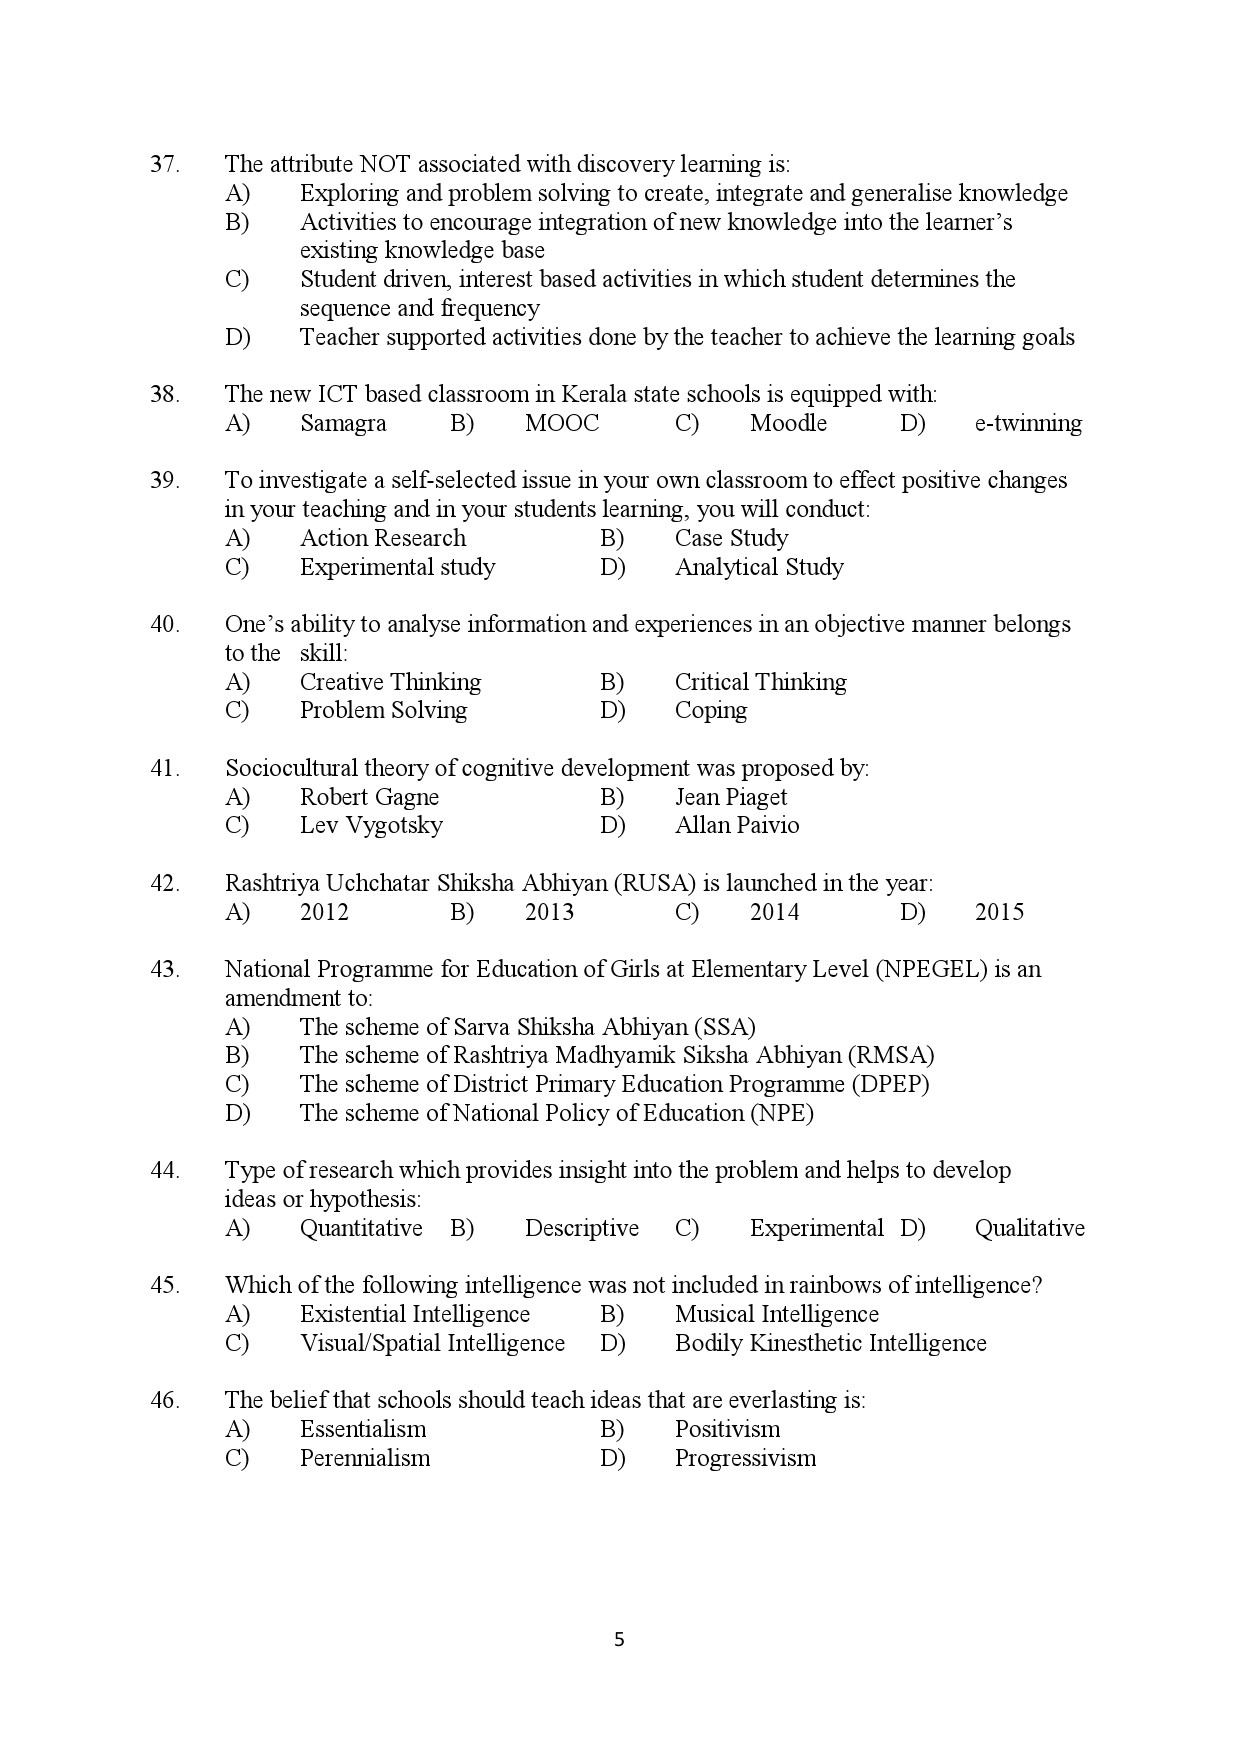 Kerala SET General Knowledge Exam Question Paper July 2018 5